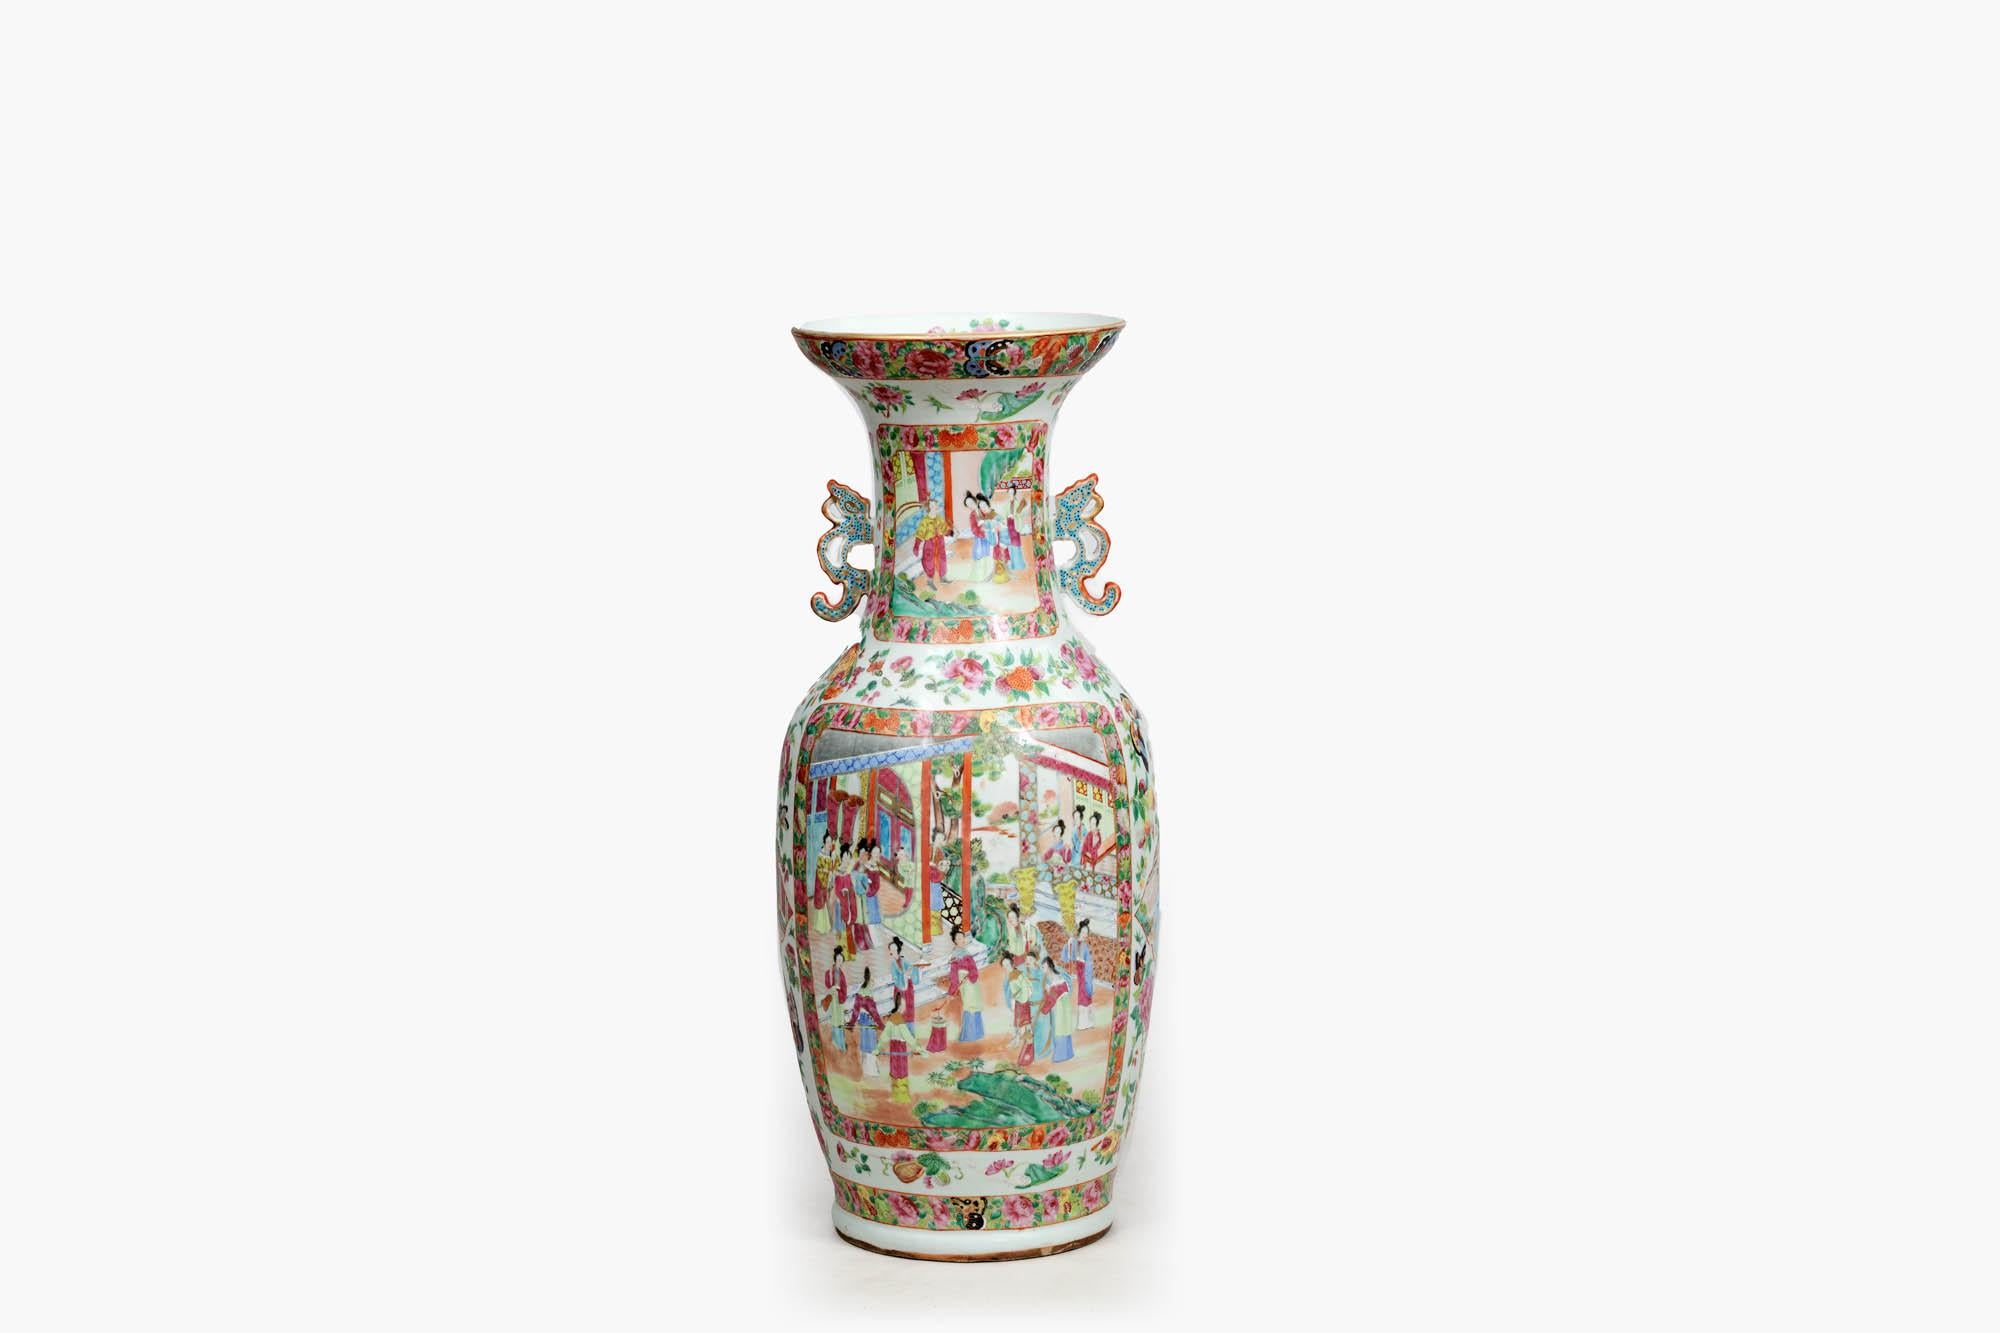 19th century hand painted Cantonese vase in the Famille Rose style. The baluster-shaped body with brightly painted panels depicts interior scenes of courtiers and their attendants within profusely decorated floral borders. The neck is decorated with